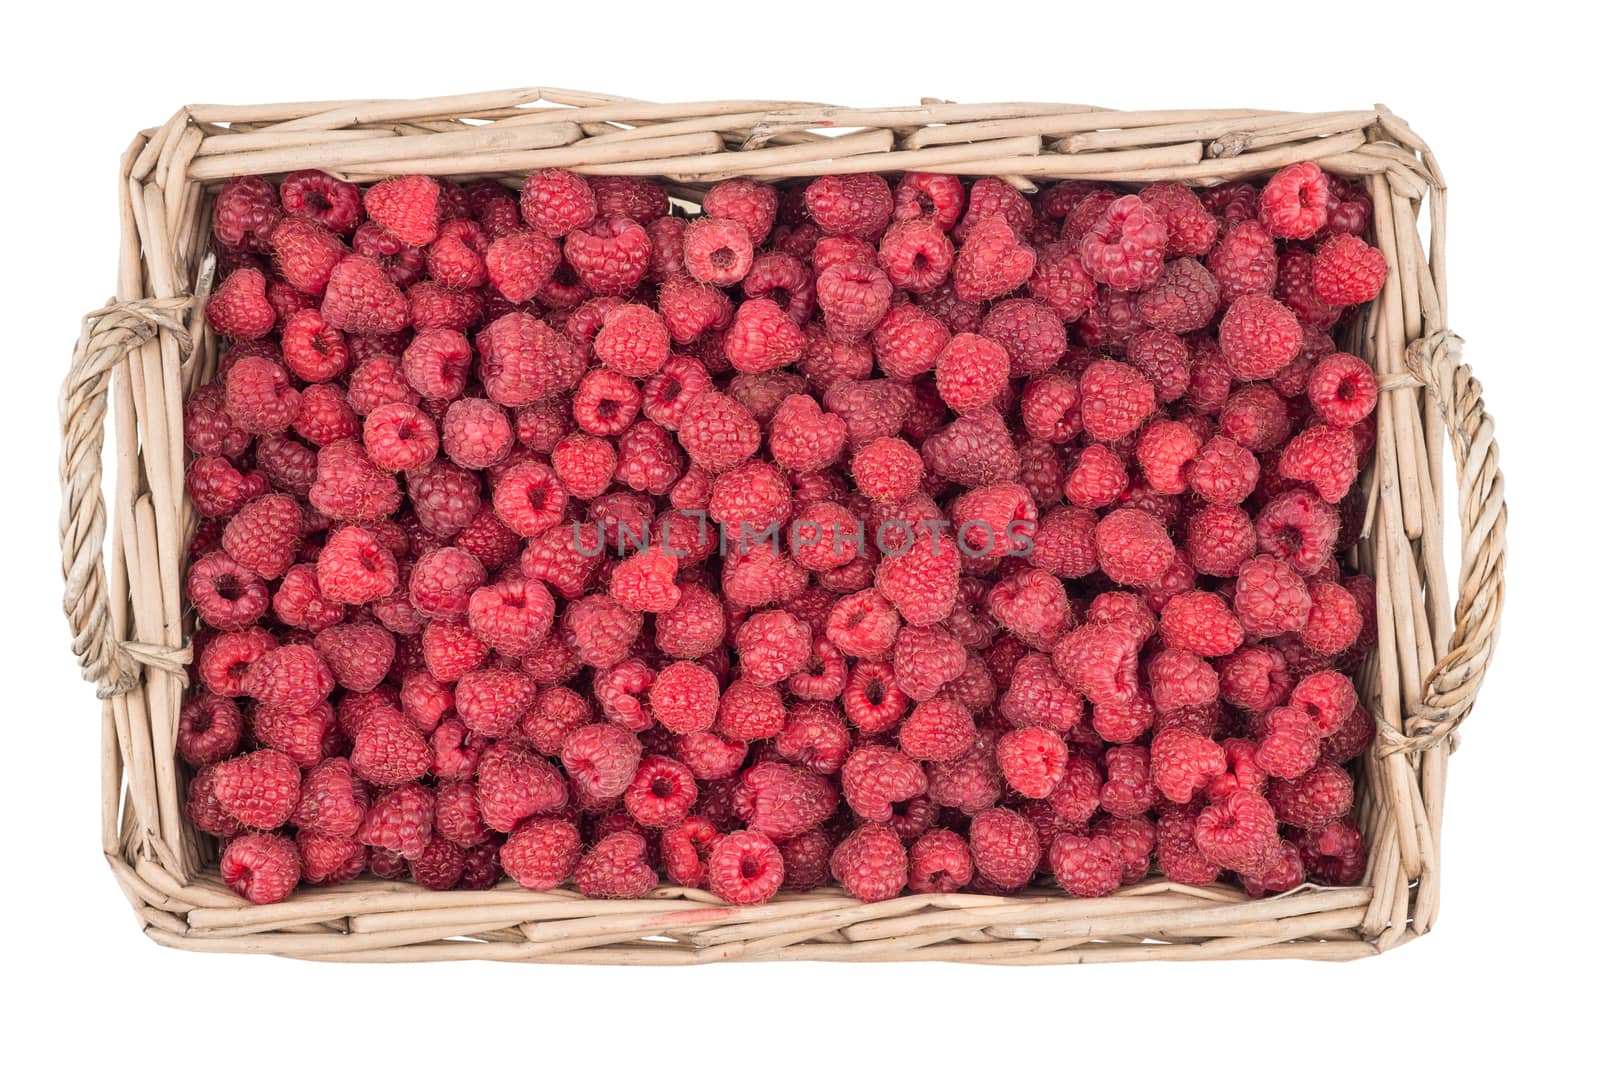 Raspberries in the basket isolated on white background.  by DGolbay